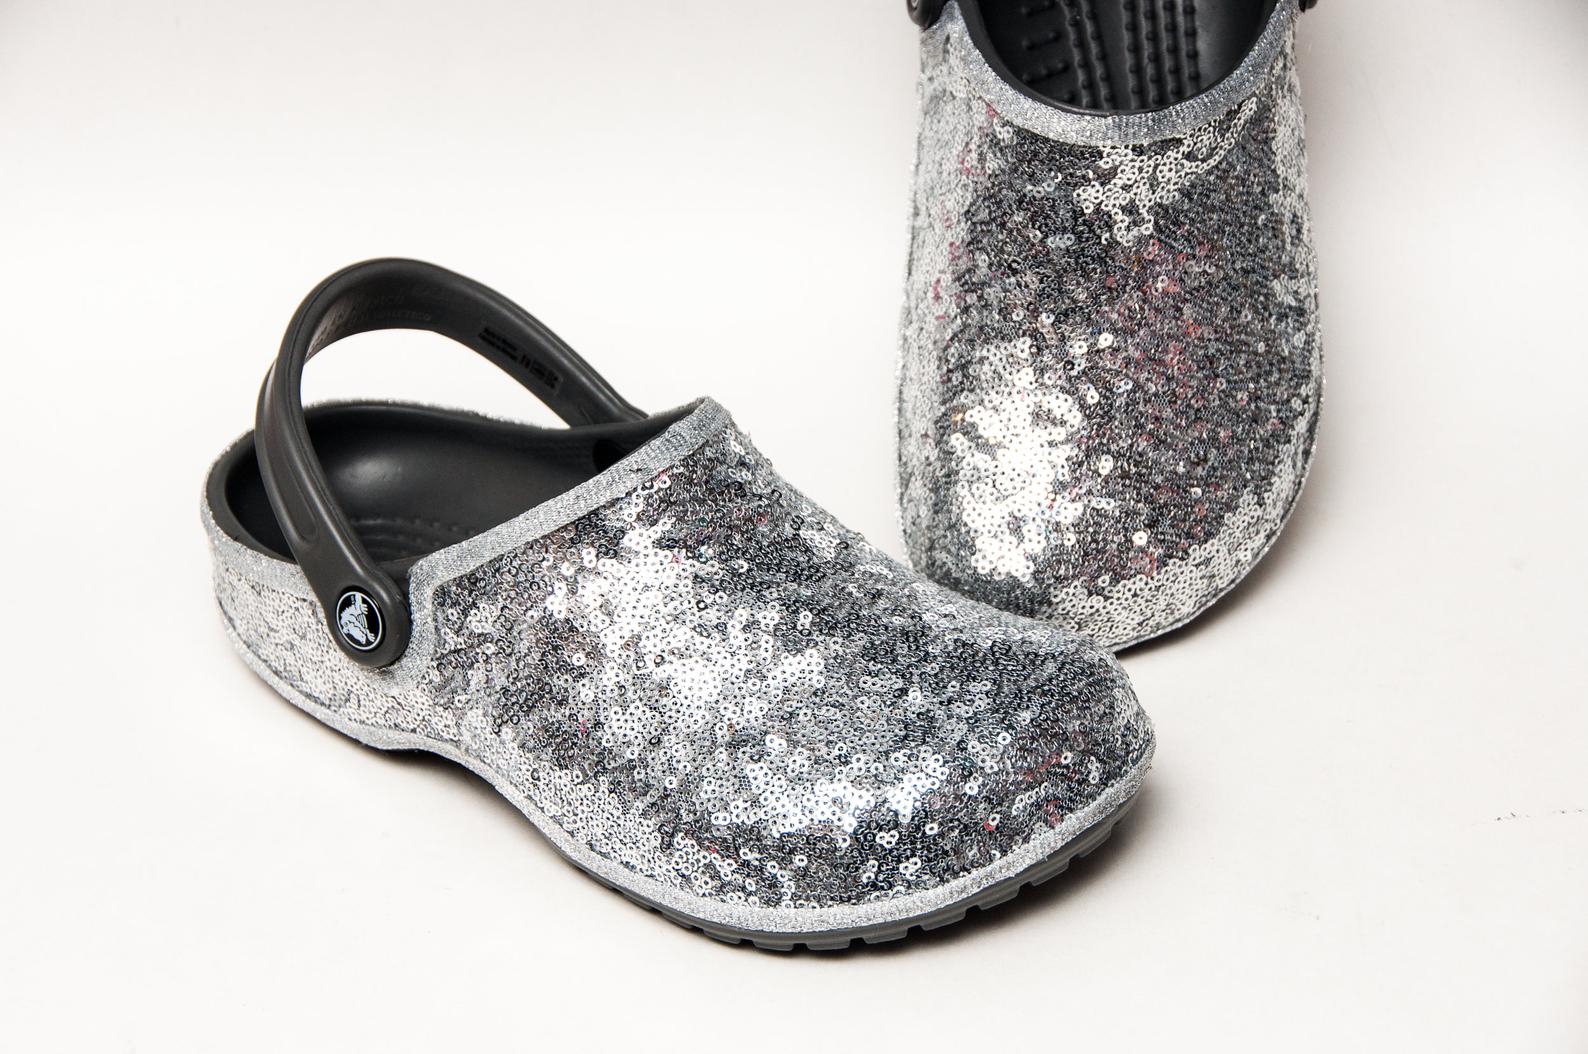 You can now buy sparkly white Crocs to wear on your wedding day